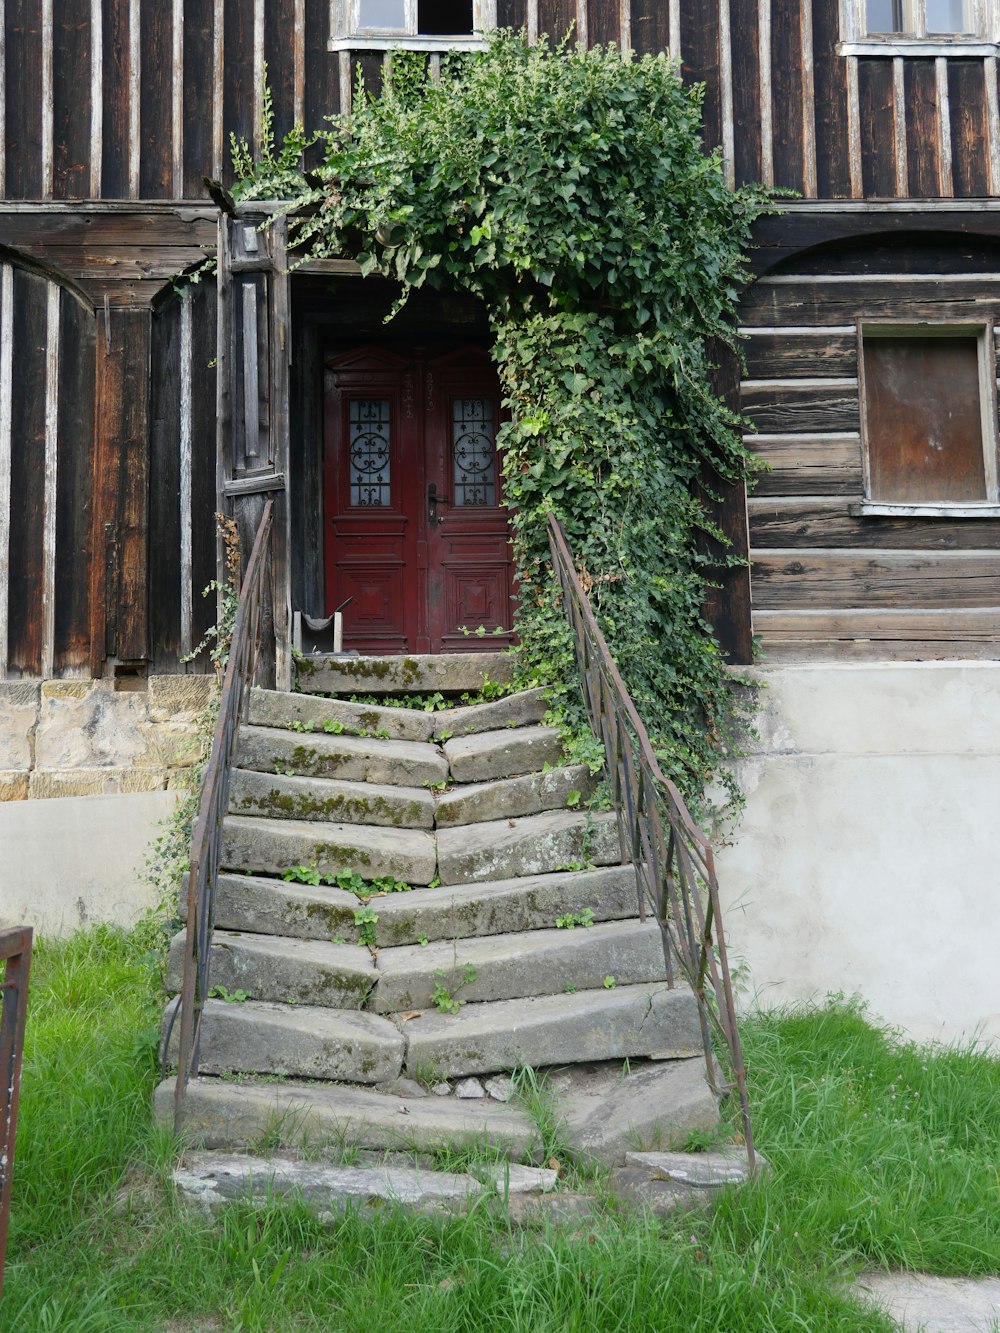 a set of stairs leading up to a wooden building